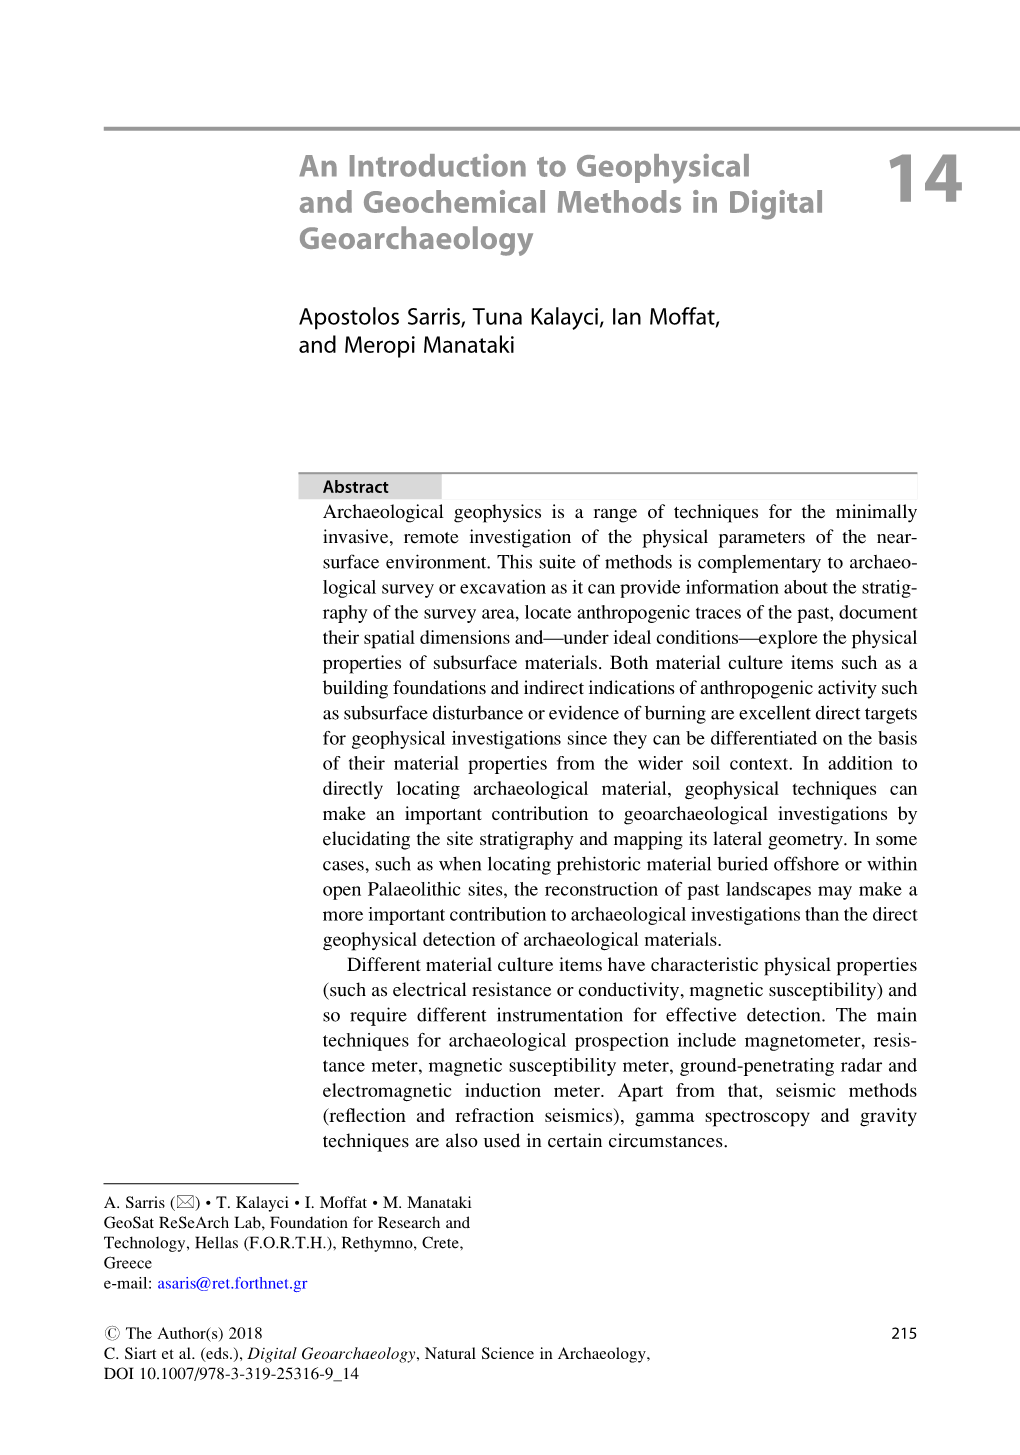 An Introduction to Geophysical and Geochemical Methods in Digital 14 Geoarchaeology